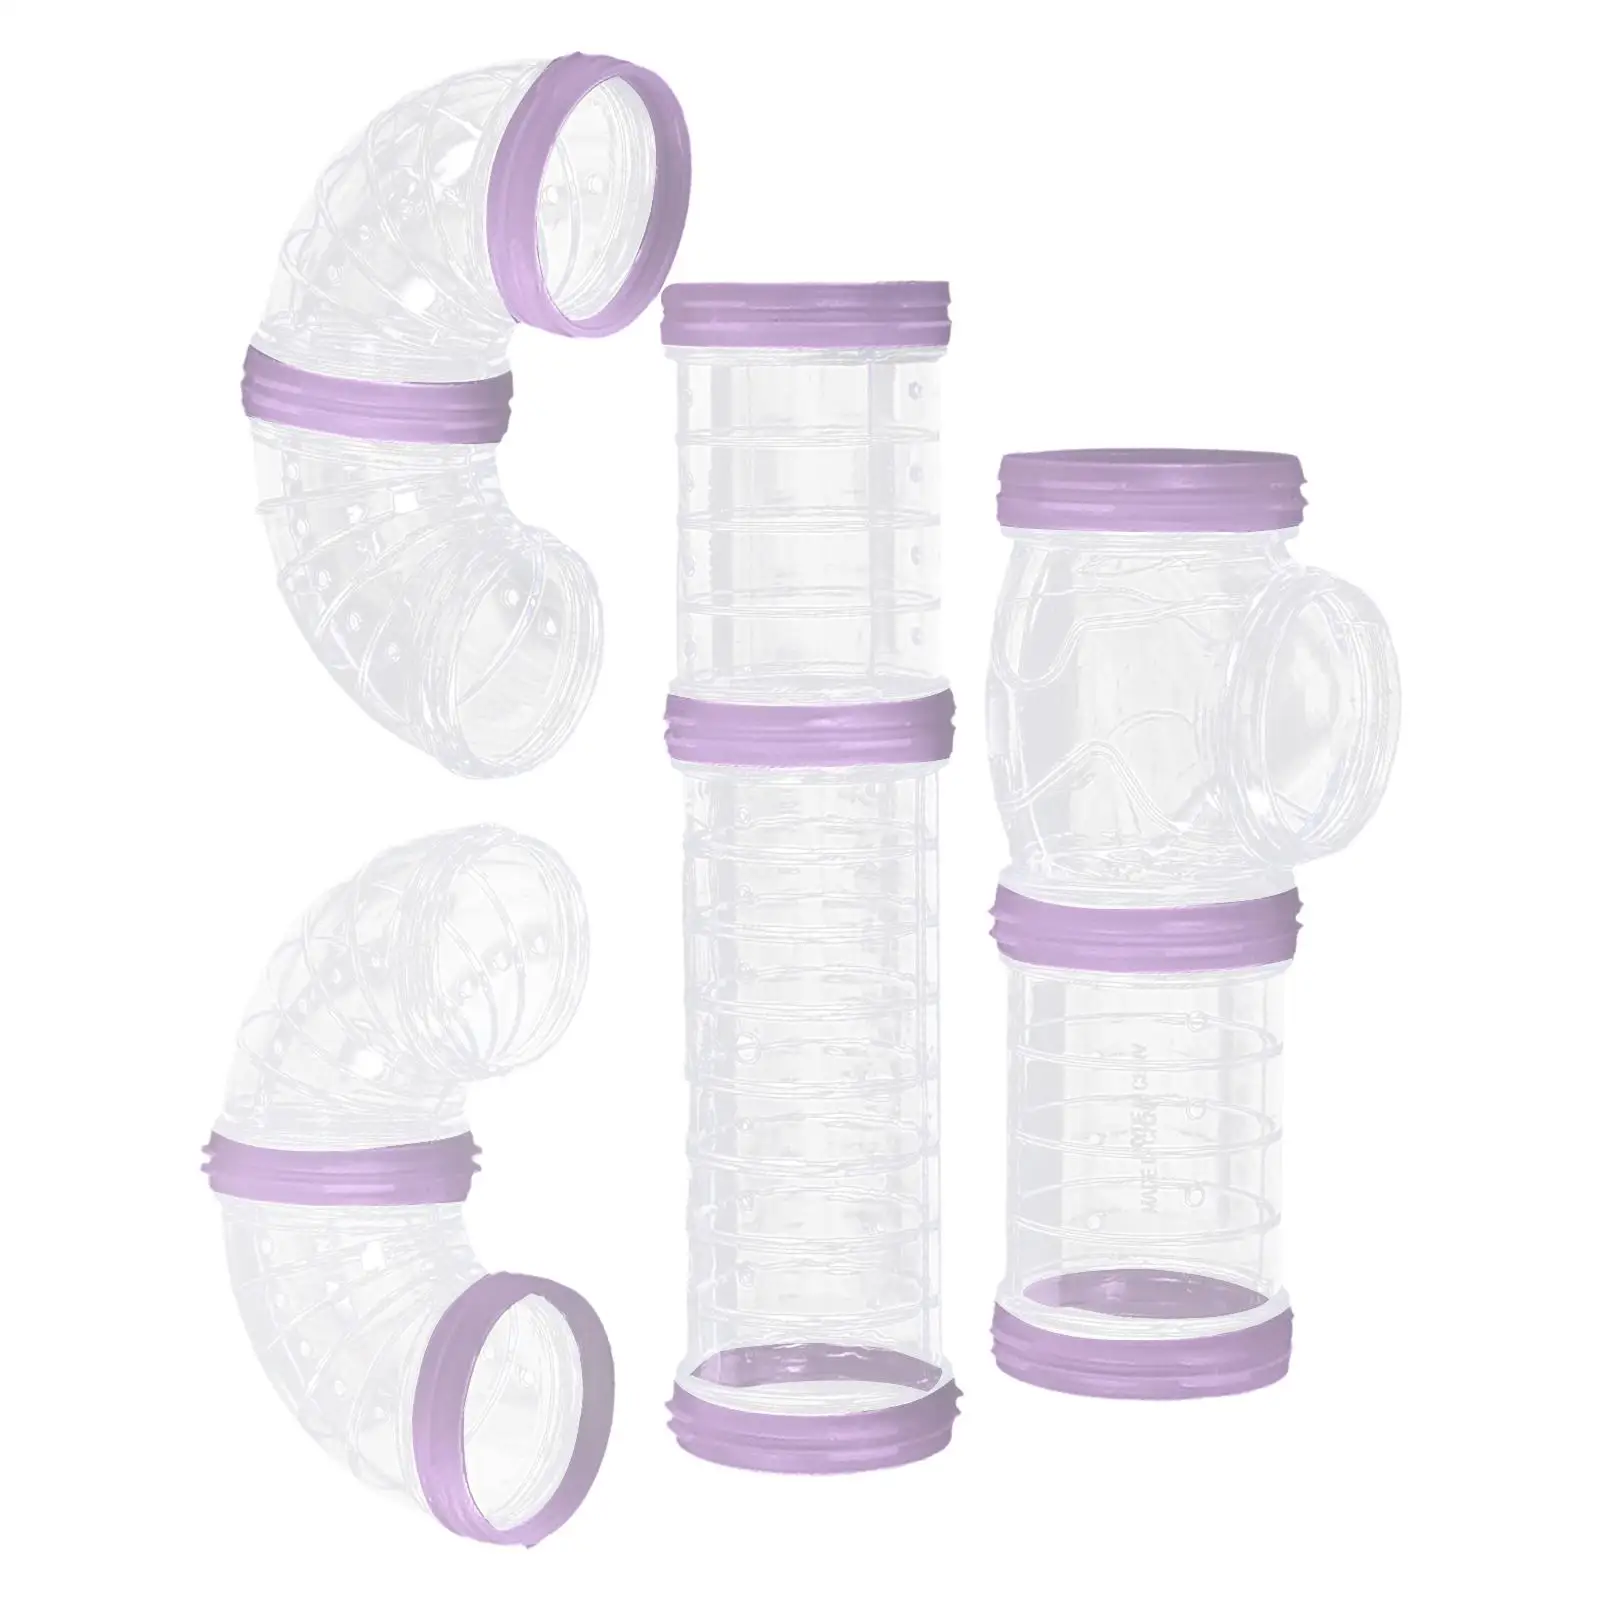 8 Pieces Multifunctional Hamster Tubes Set Connection Tunnels for Small Pets